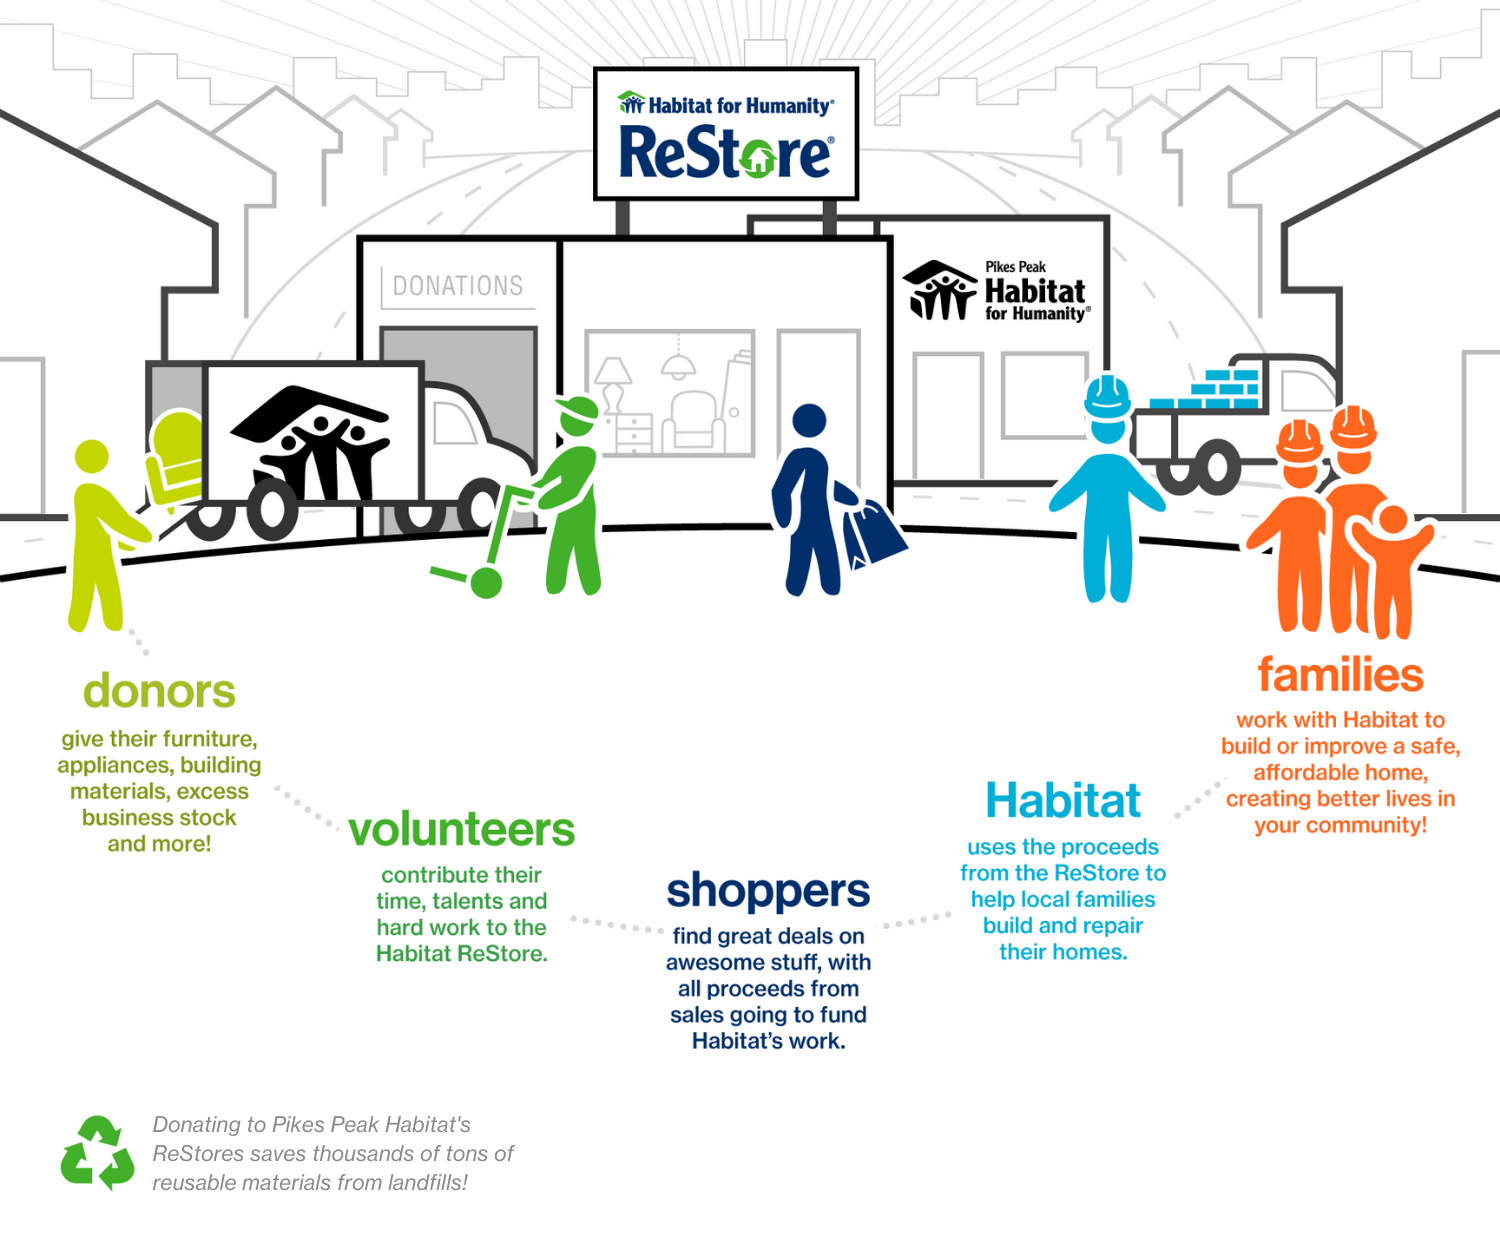 Shows role of donors, volunteers, shoppers, Habitat, and families at ReStore